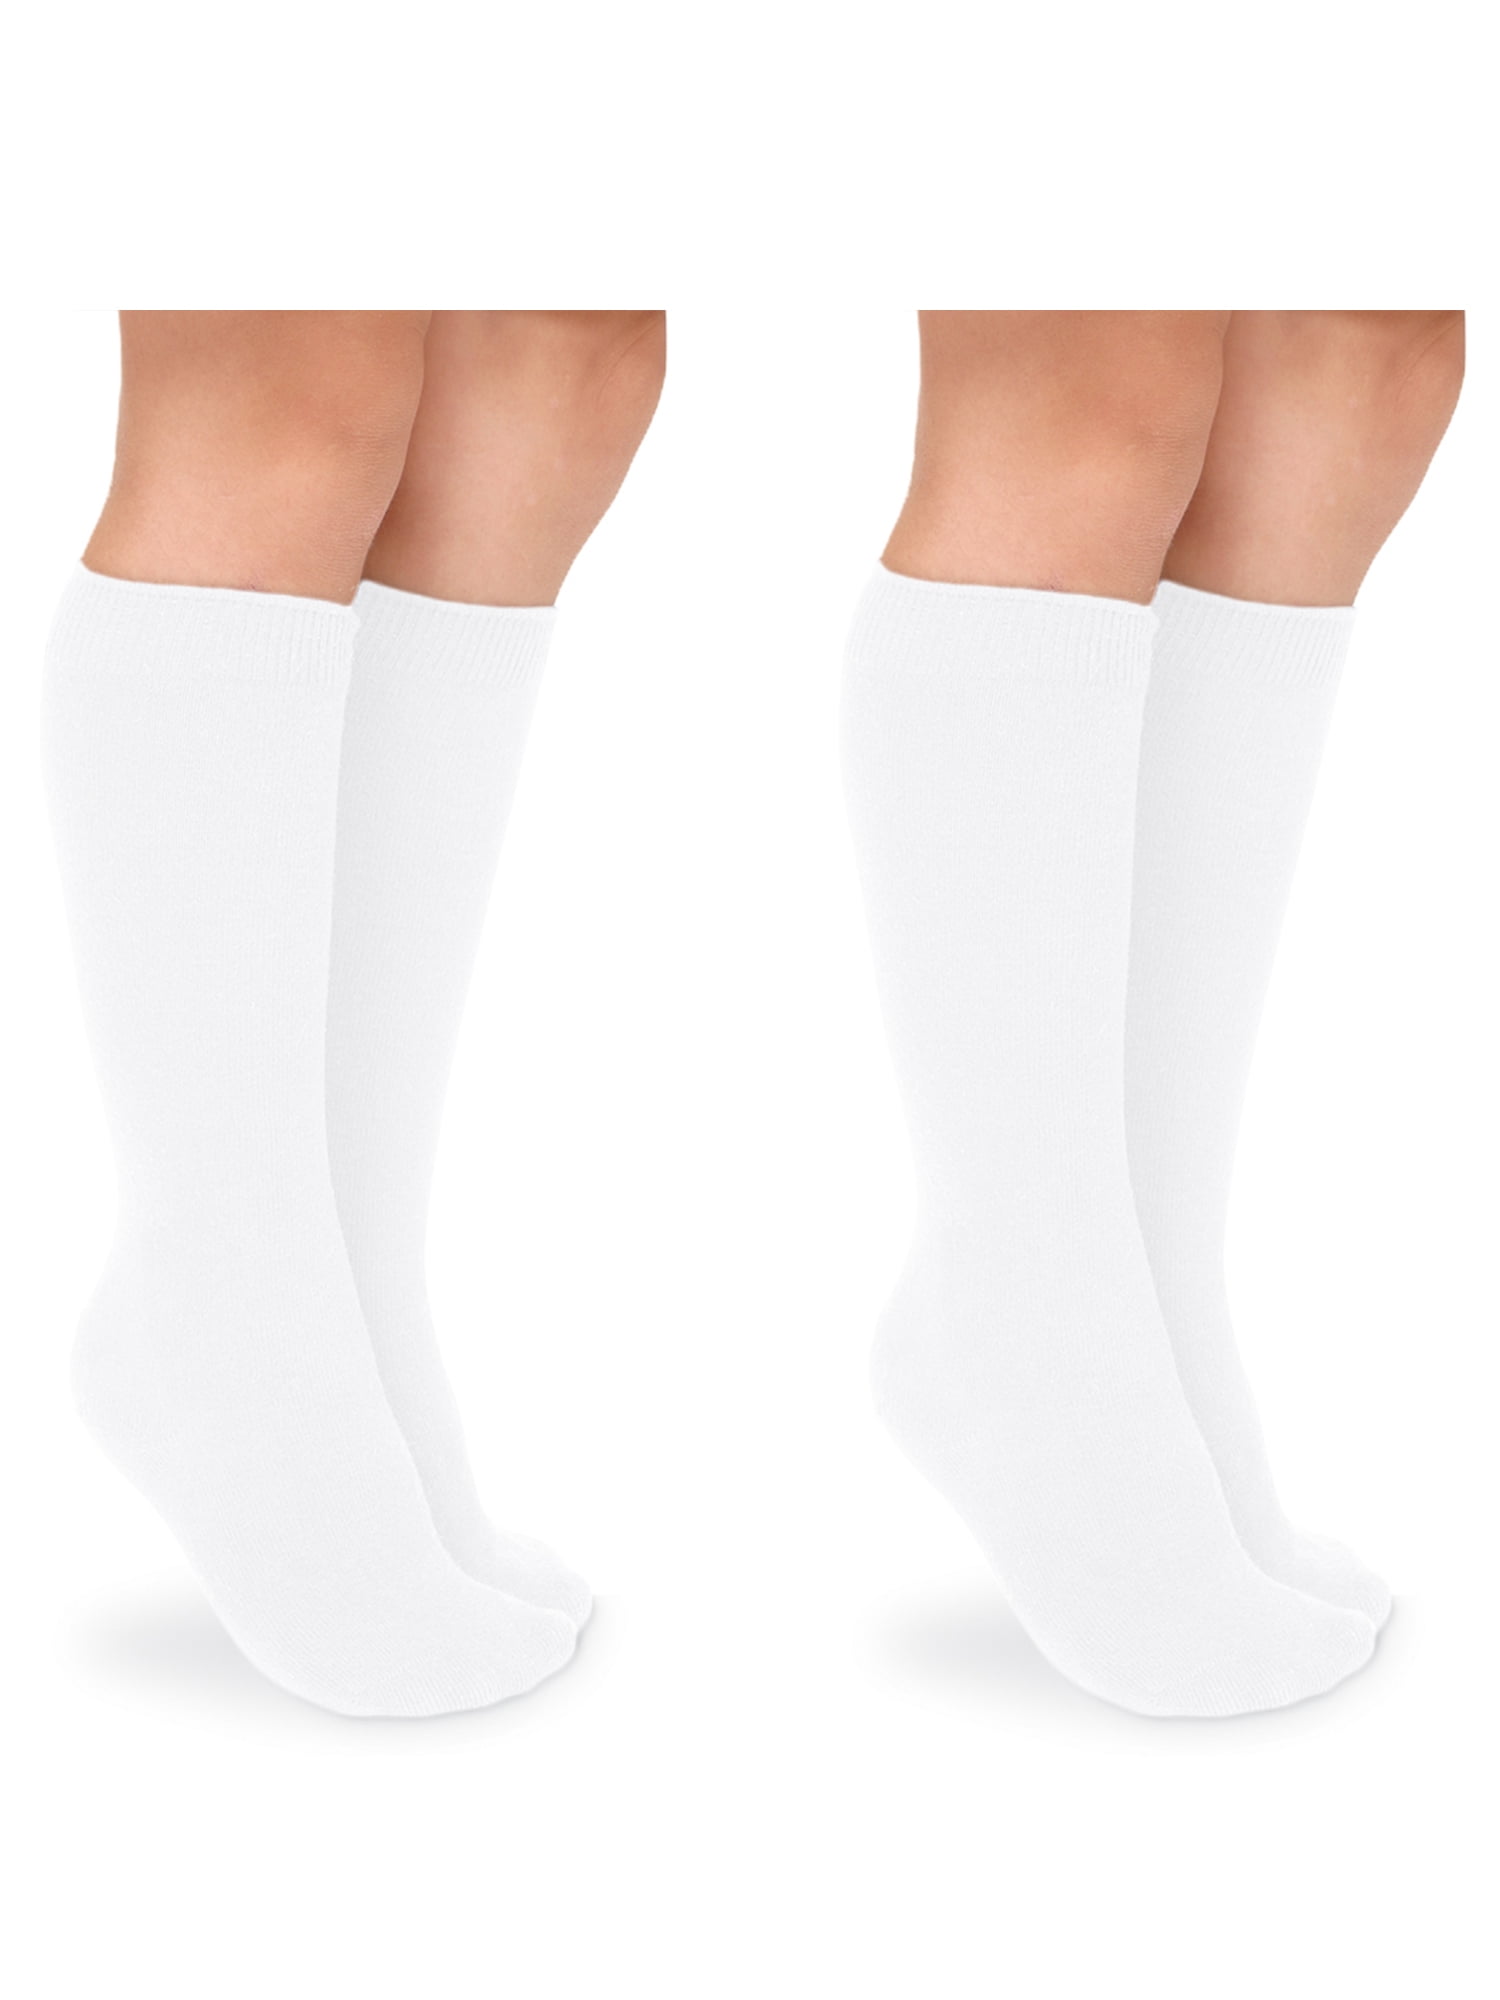 Girls Long Knee High Cotton Rich School Socks in All Size in 10 Colors